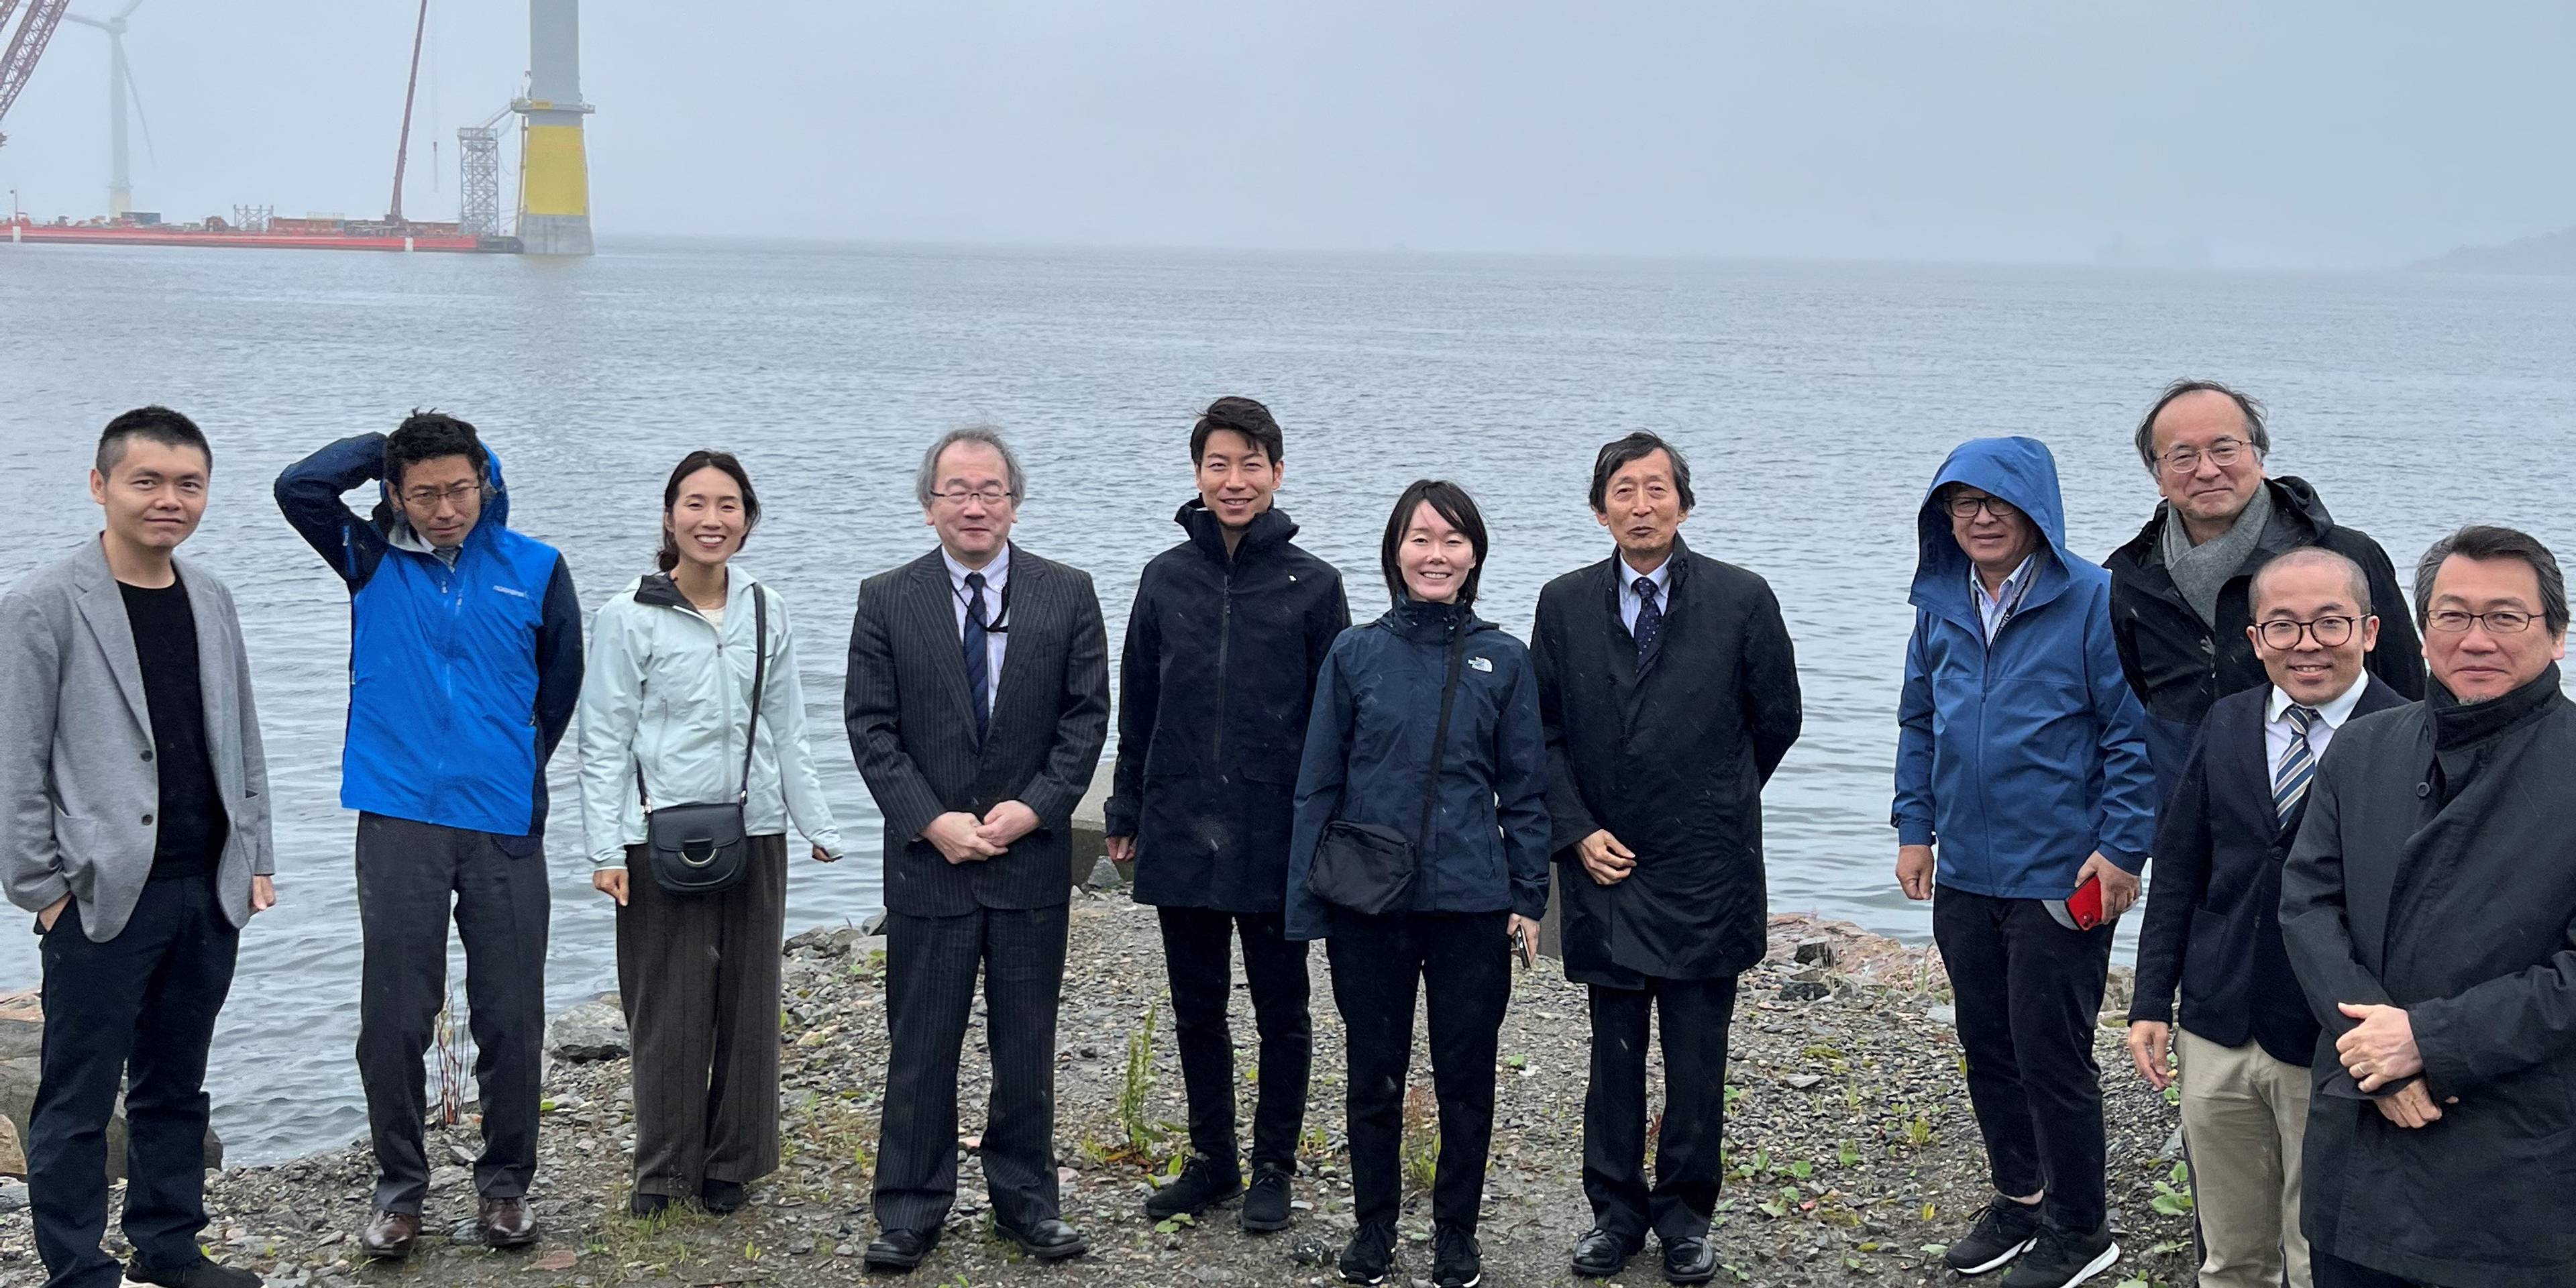 Japanese stakeholders visiting Hywind Scotland and Hywind Tampen